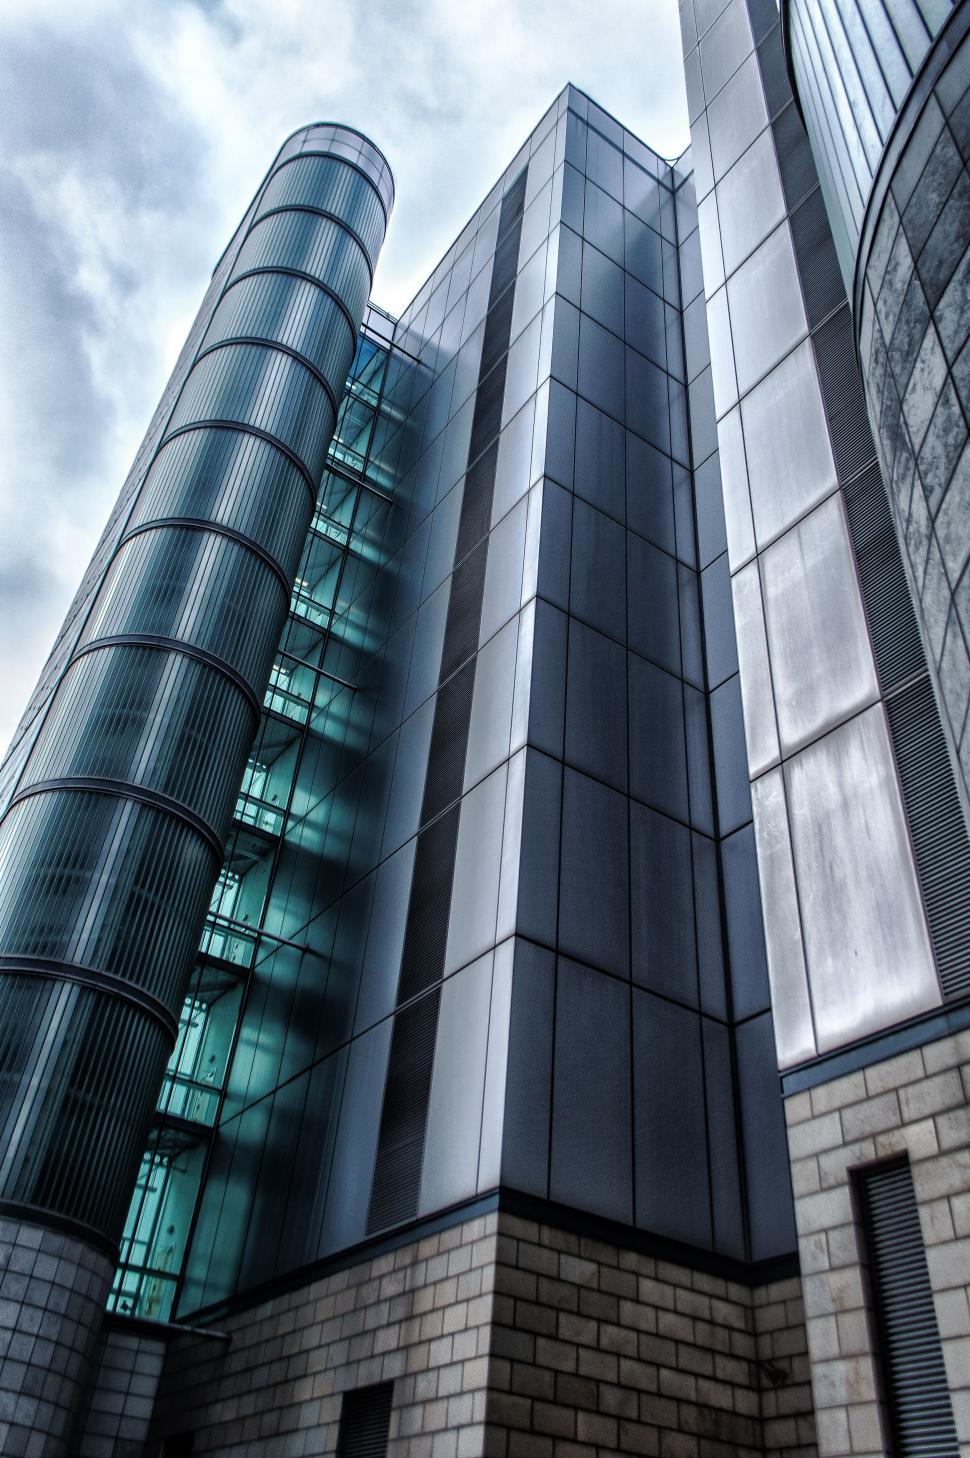 Free Image of Steel and Glass Building  